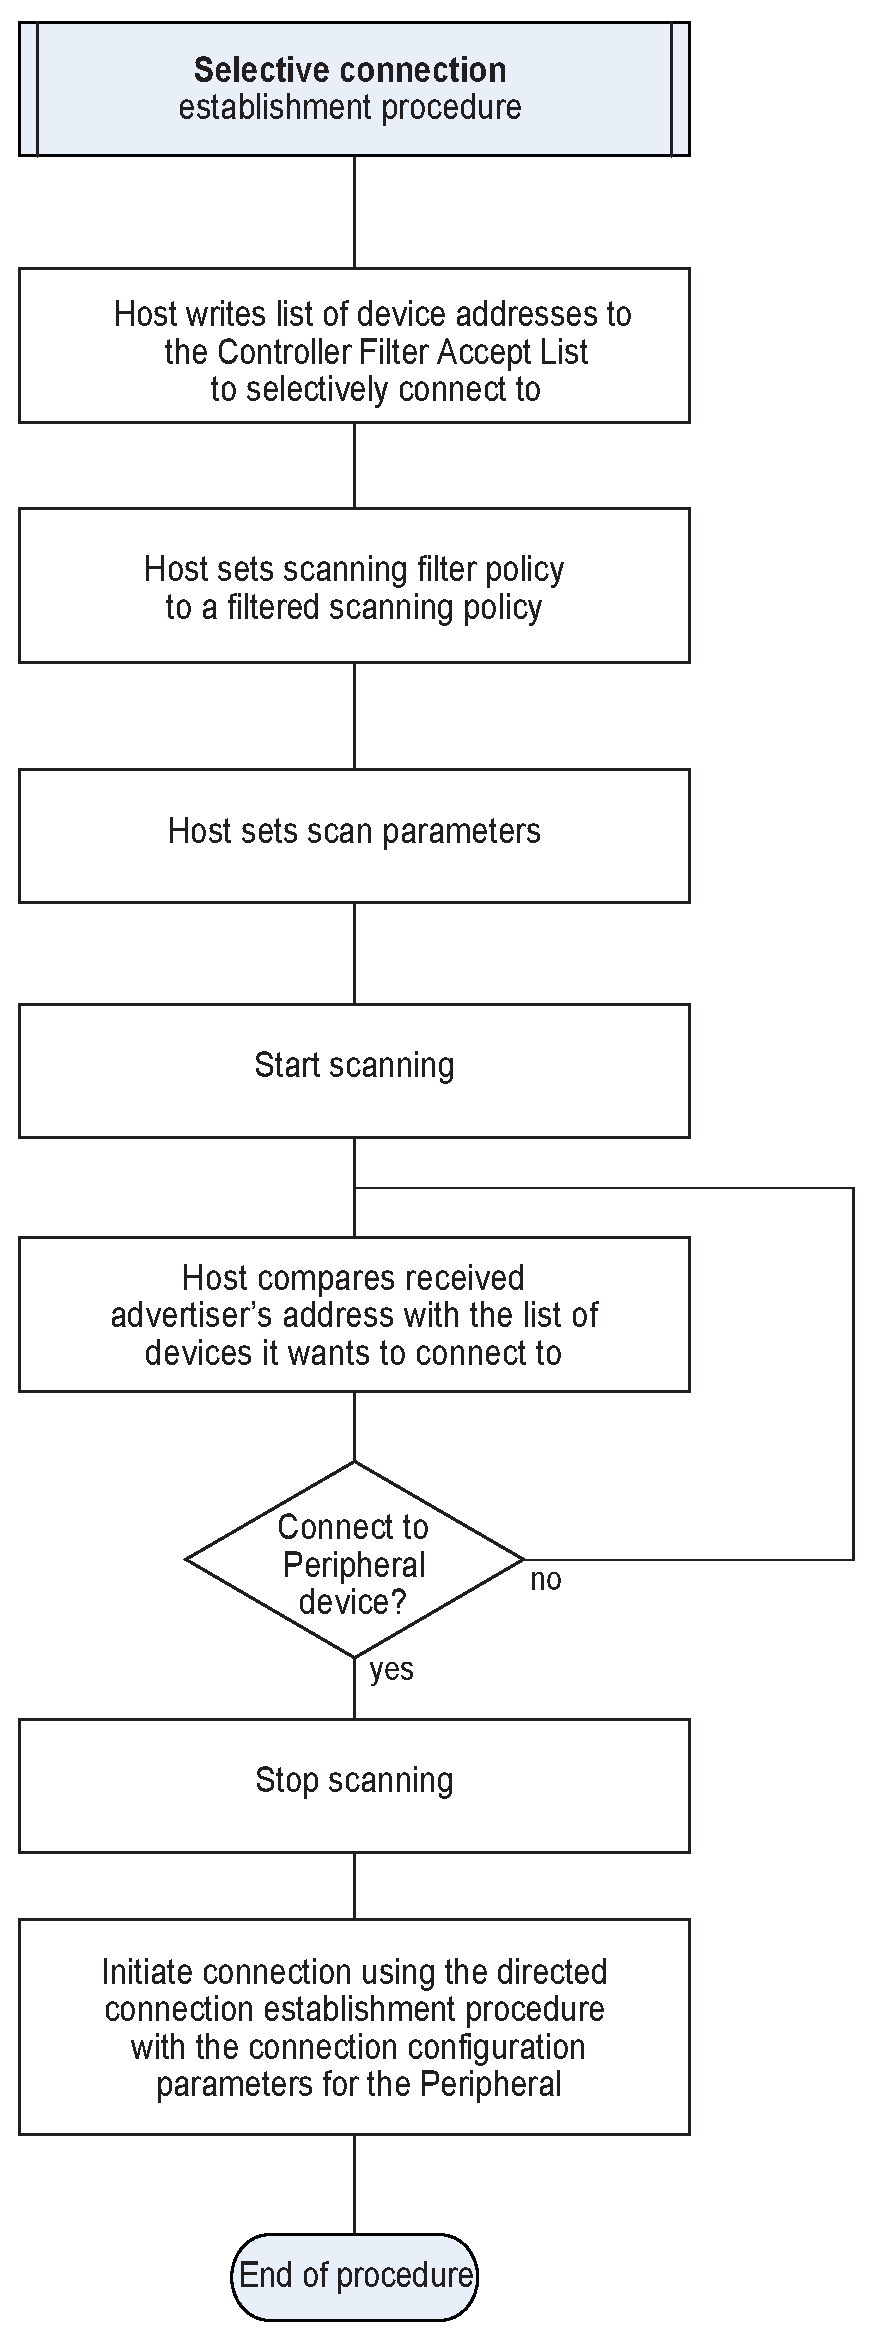 Flow chart for a device performing the Selective Connection Establishment procedure